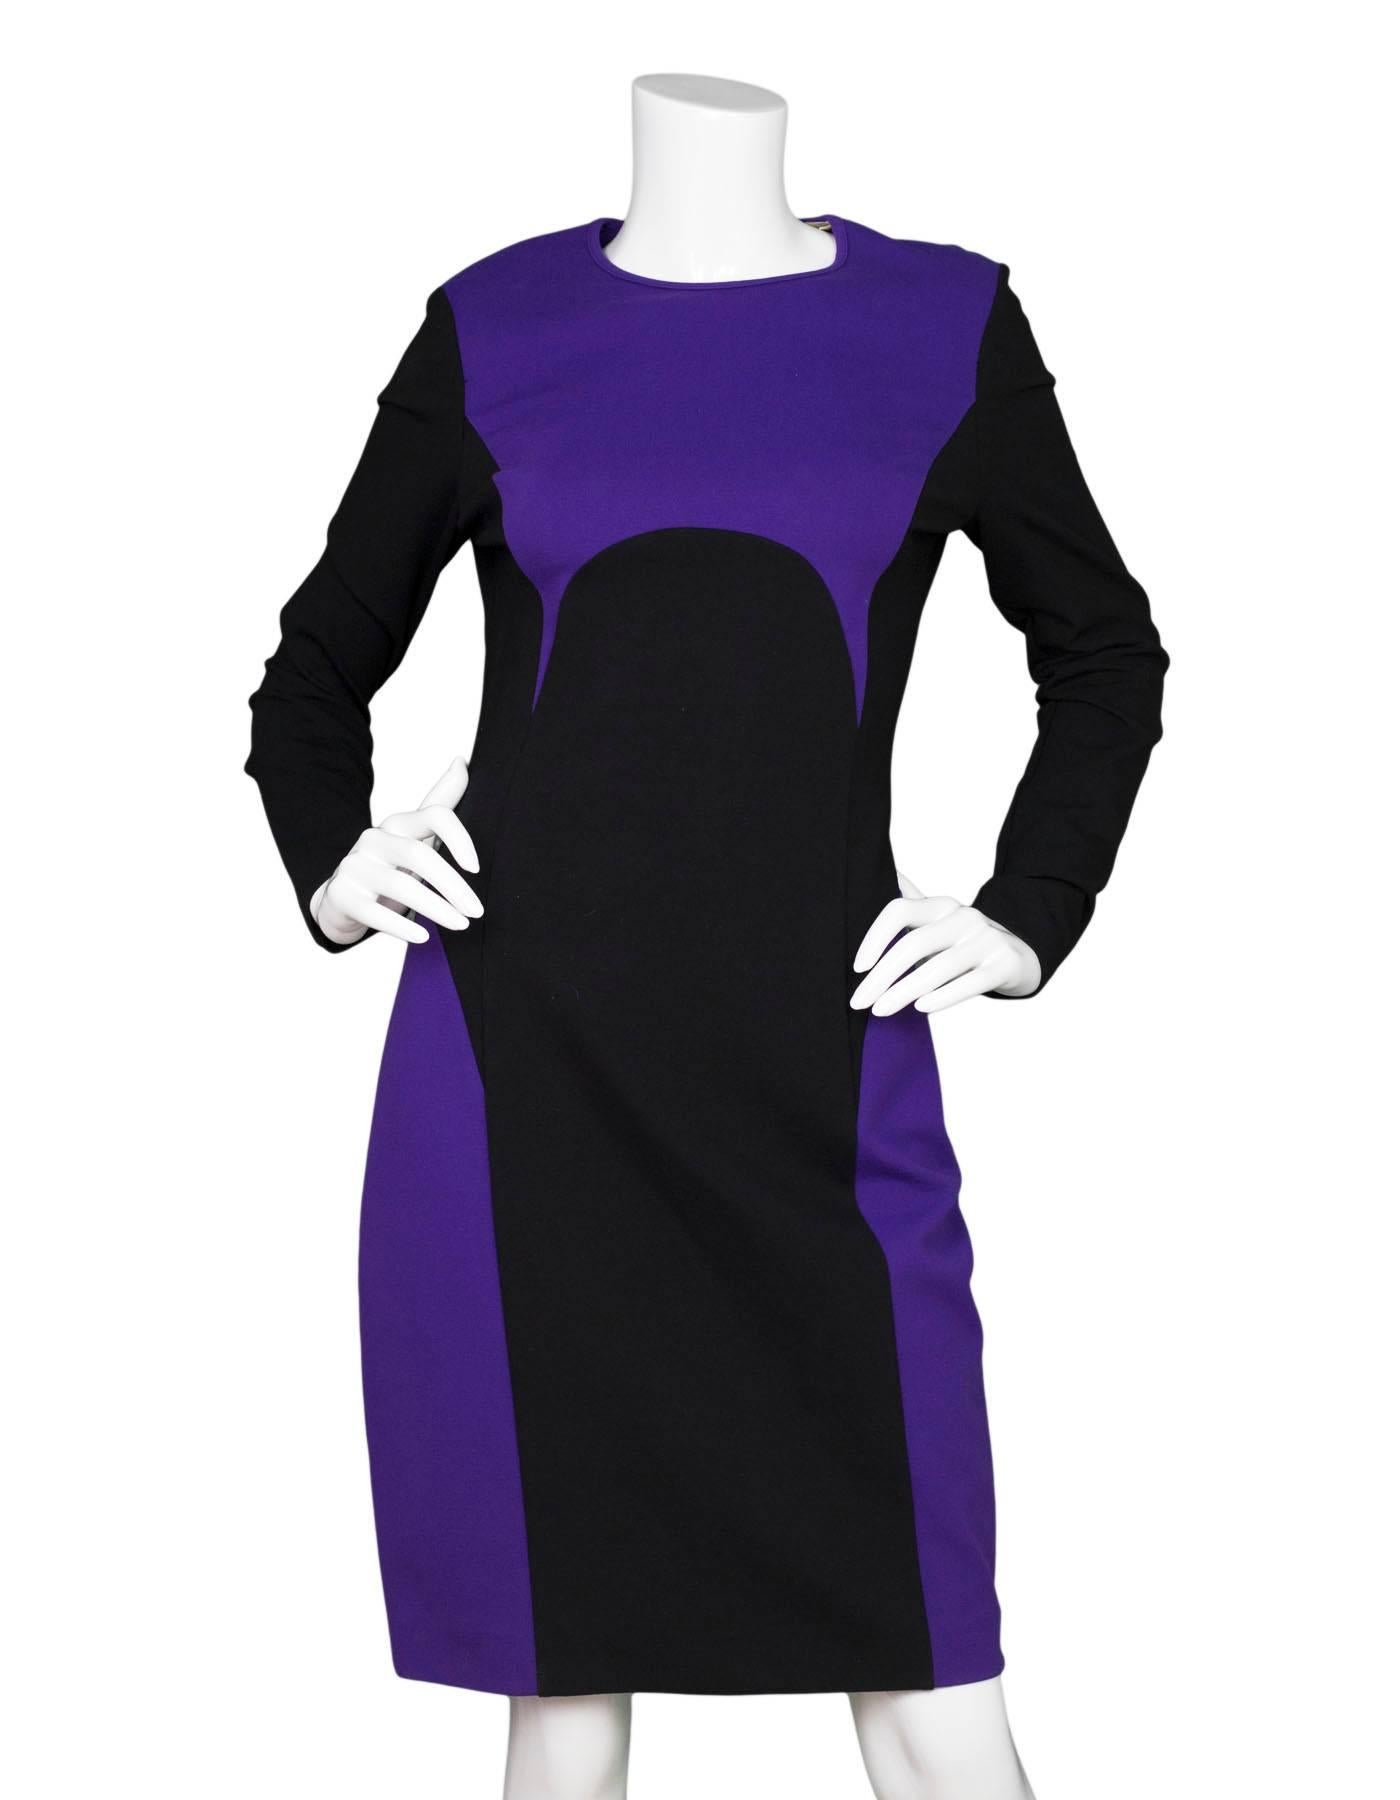 Michael Kors Purple & Black Sheath Dress

Made In: Italy
Color: Black and purple
Composition: 73% rayon, 22% polyamide, 5% spandex
Lining: Purple and black, 61% acetate, 39% rayon
Closure/Opening: Back zip up
Exterior Pockets: None
Interior